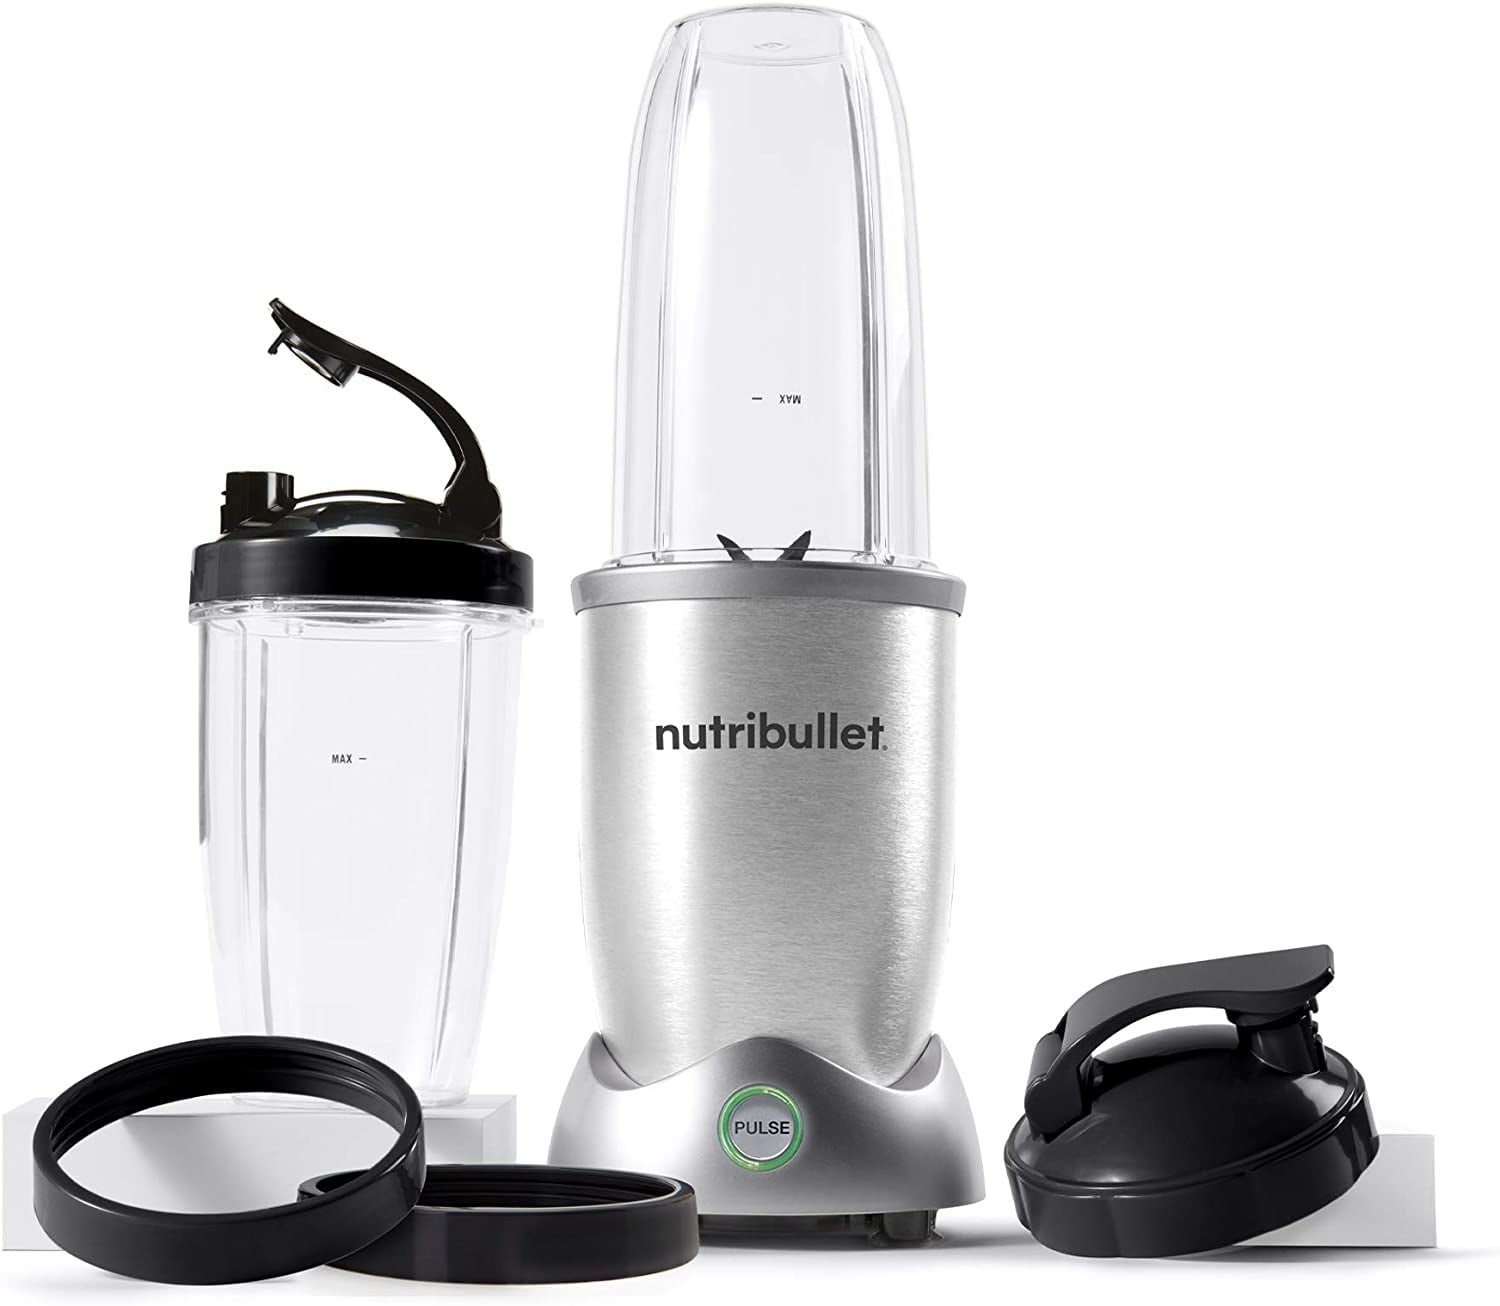 NutriBullet #NB2-10 Pro 1000W Personal Blender with 2 Cups and 2